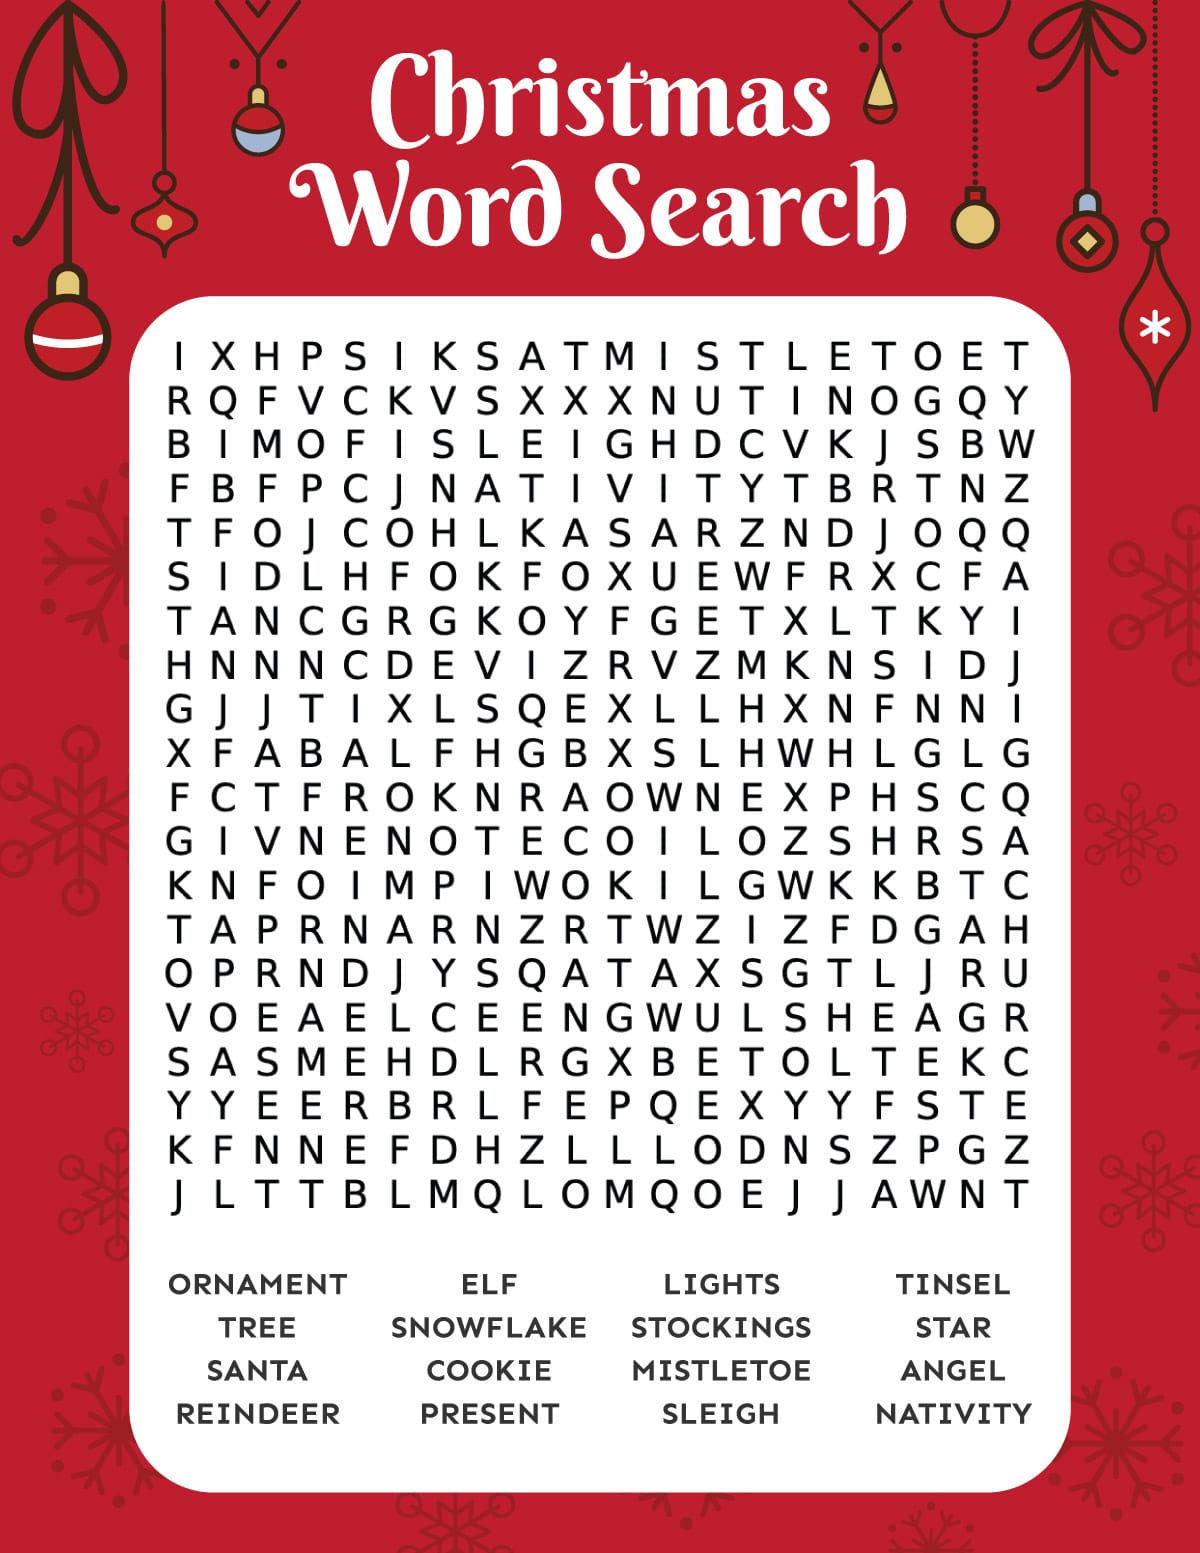 Live Worksheets Christmas Word Search